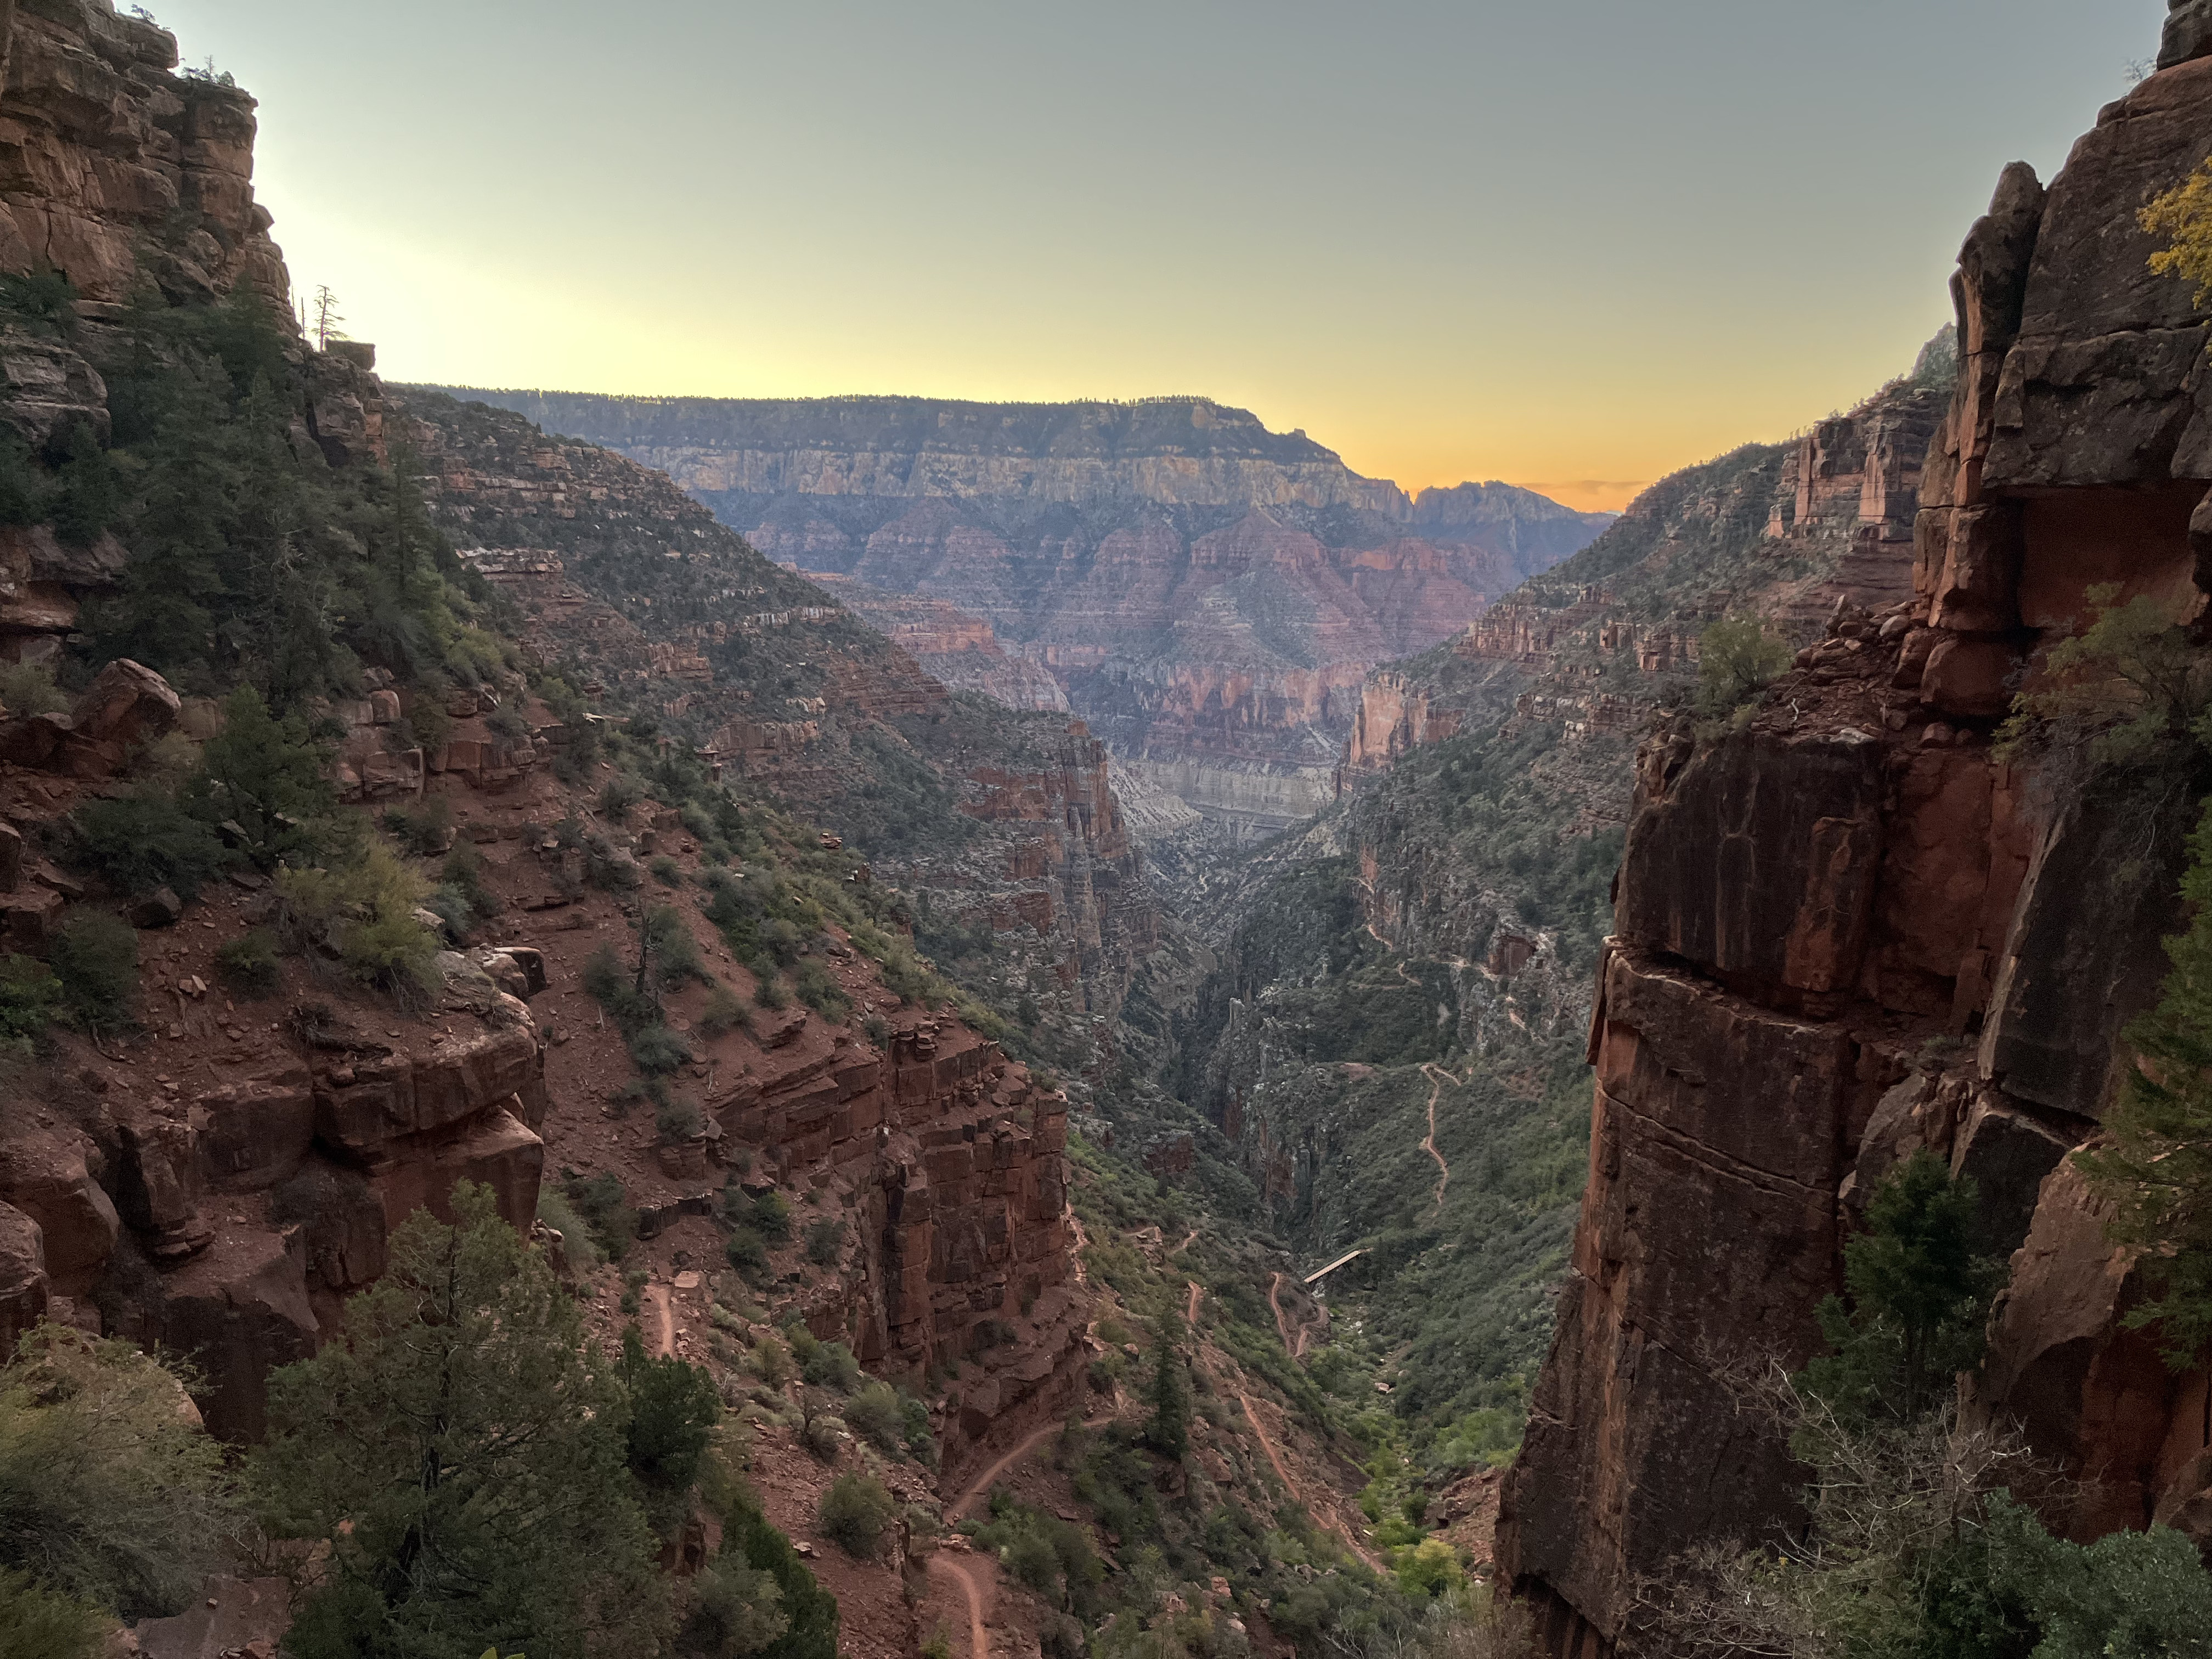 This is the moment when it was light enough to see the canyon well. Our minds were blown.